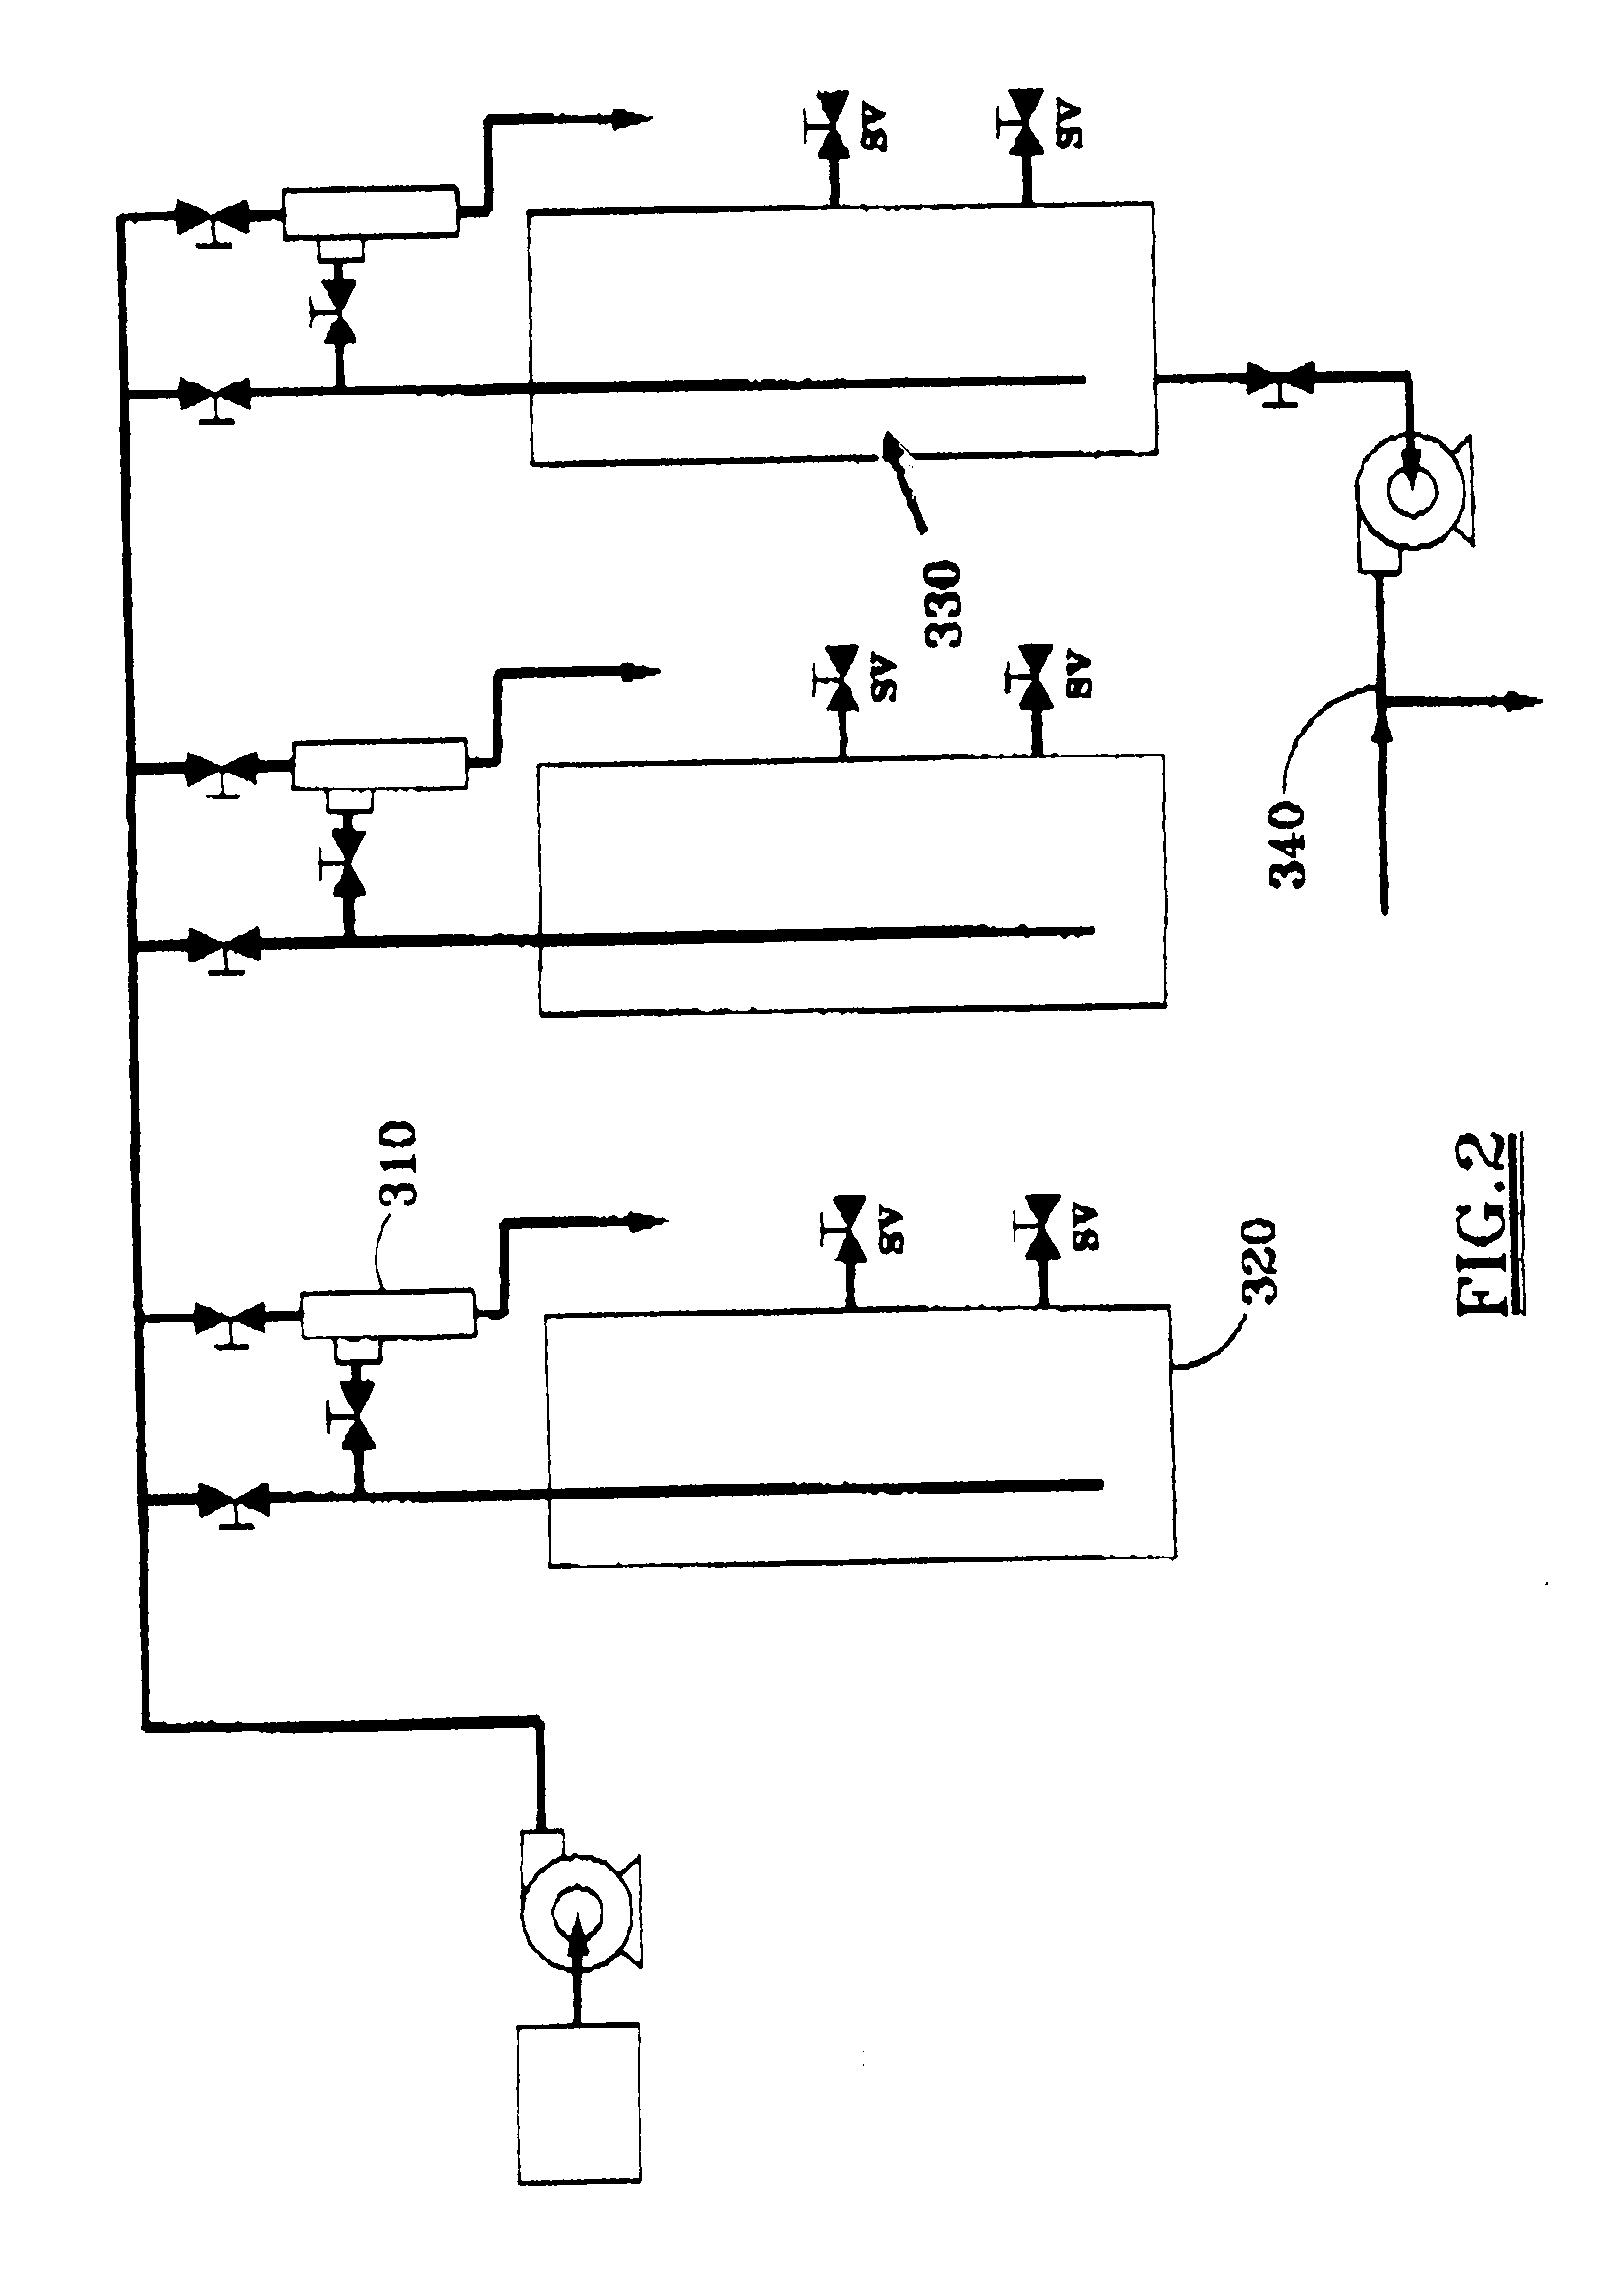 System and Process for Treating Ballast Water